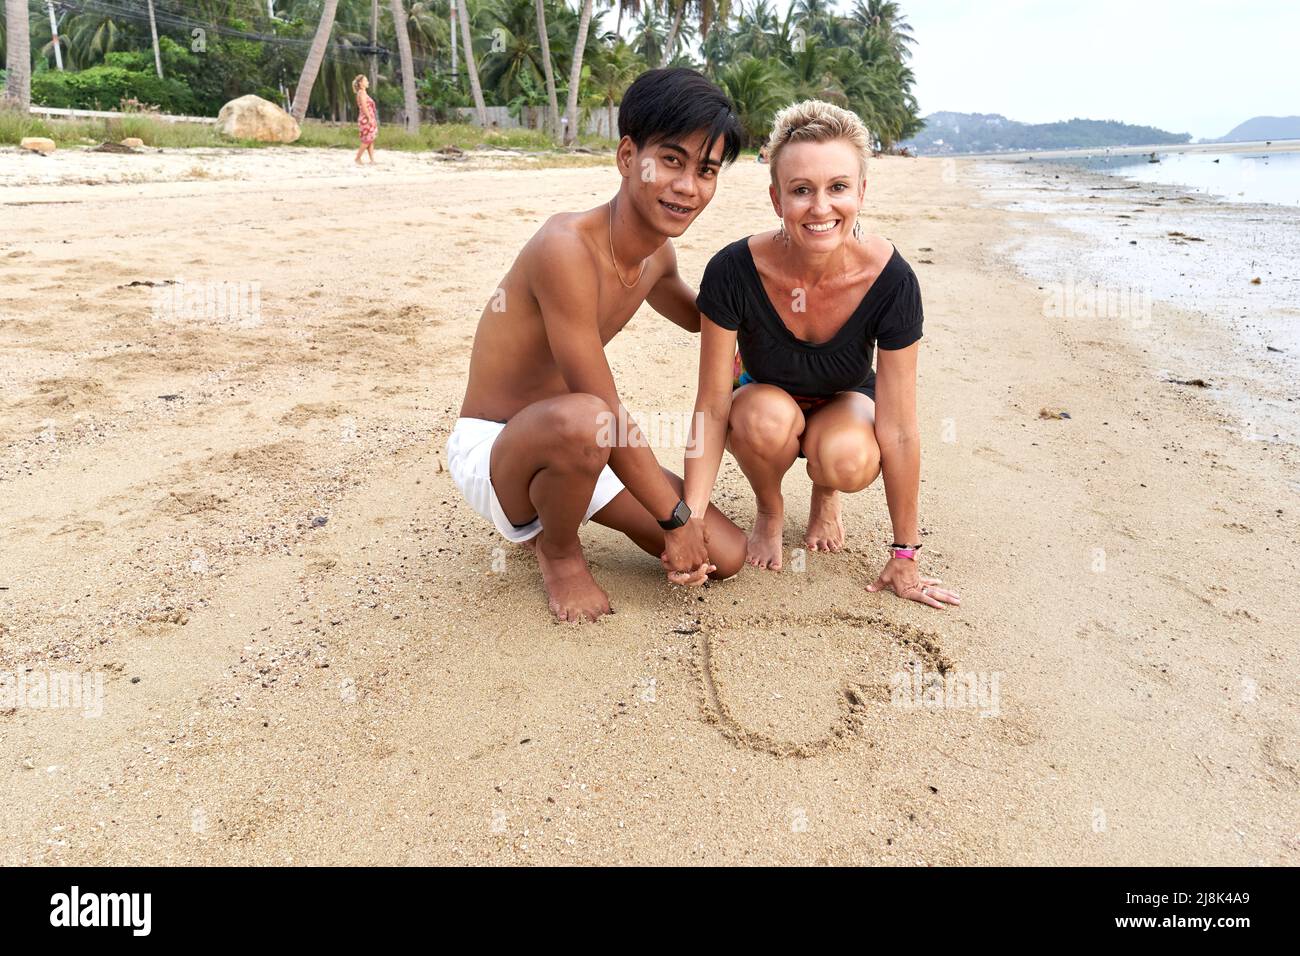 Couple crouching on the beach while drawing a heart shape on the sand Stock Photo